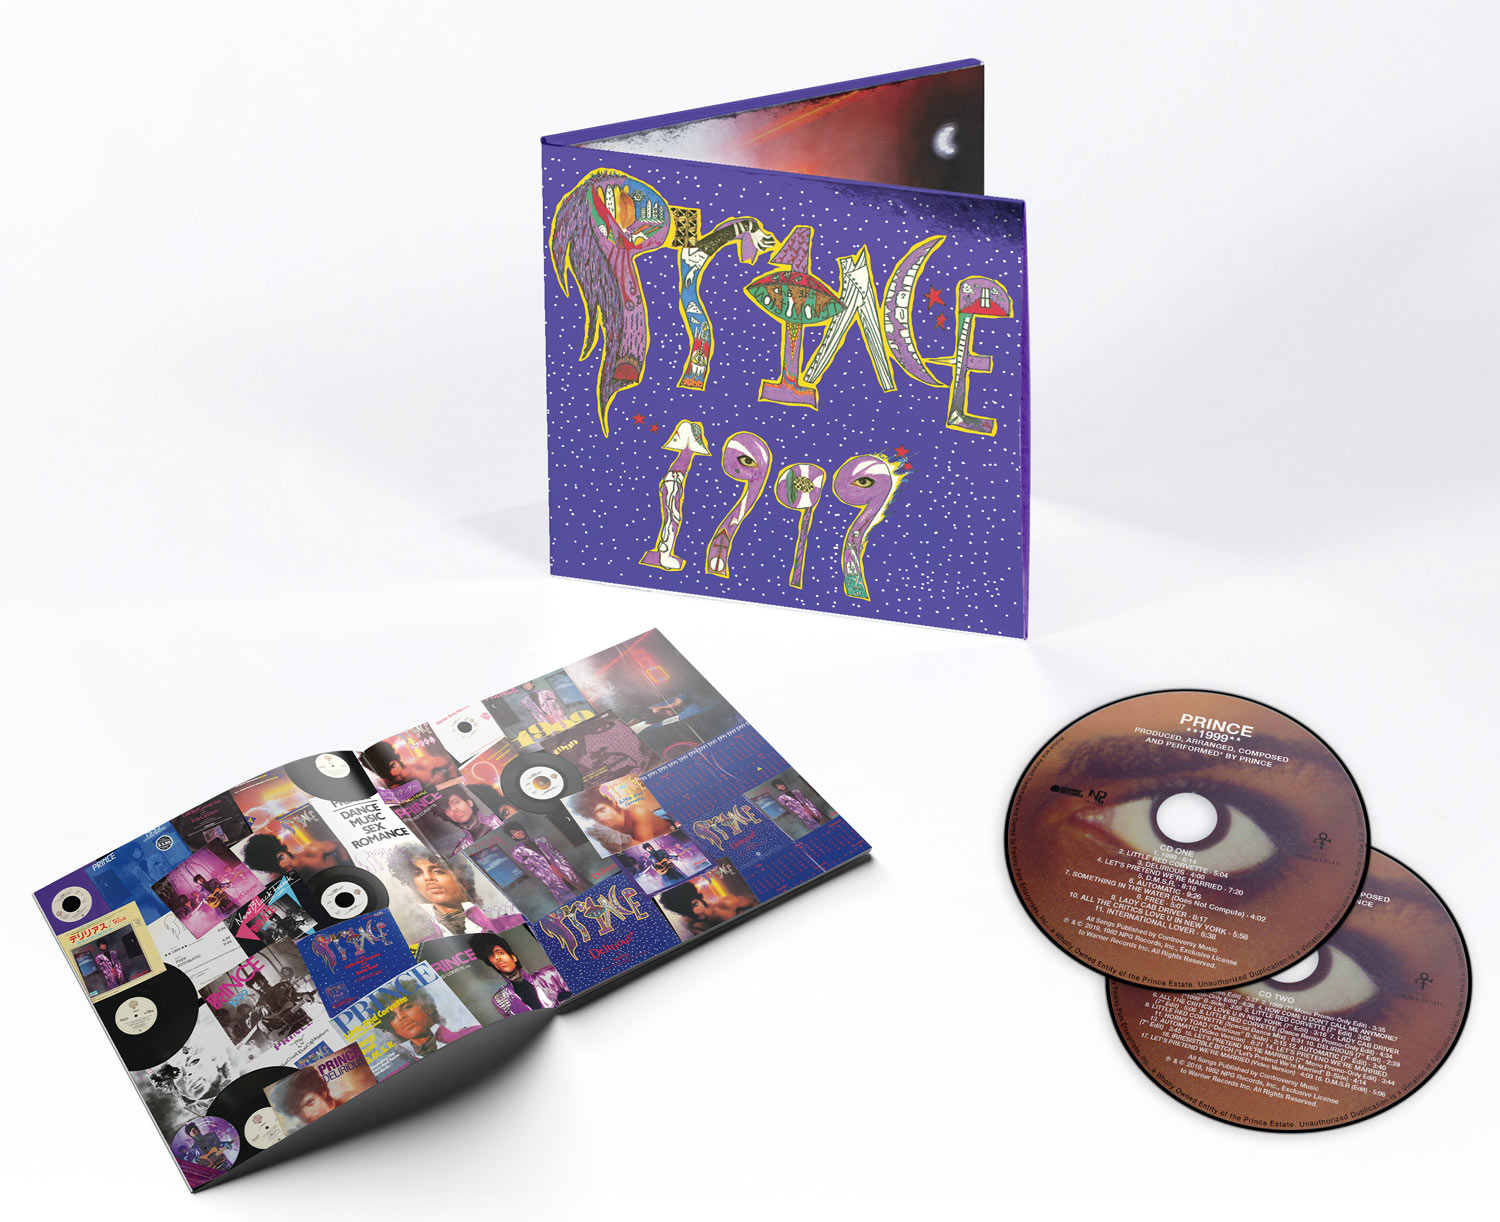 Prince / 1999 super deluxe reissue offers a wealth of unreleased 